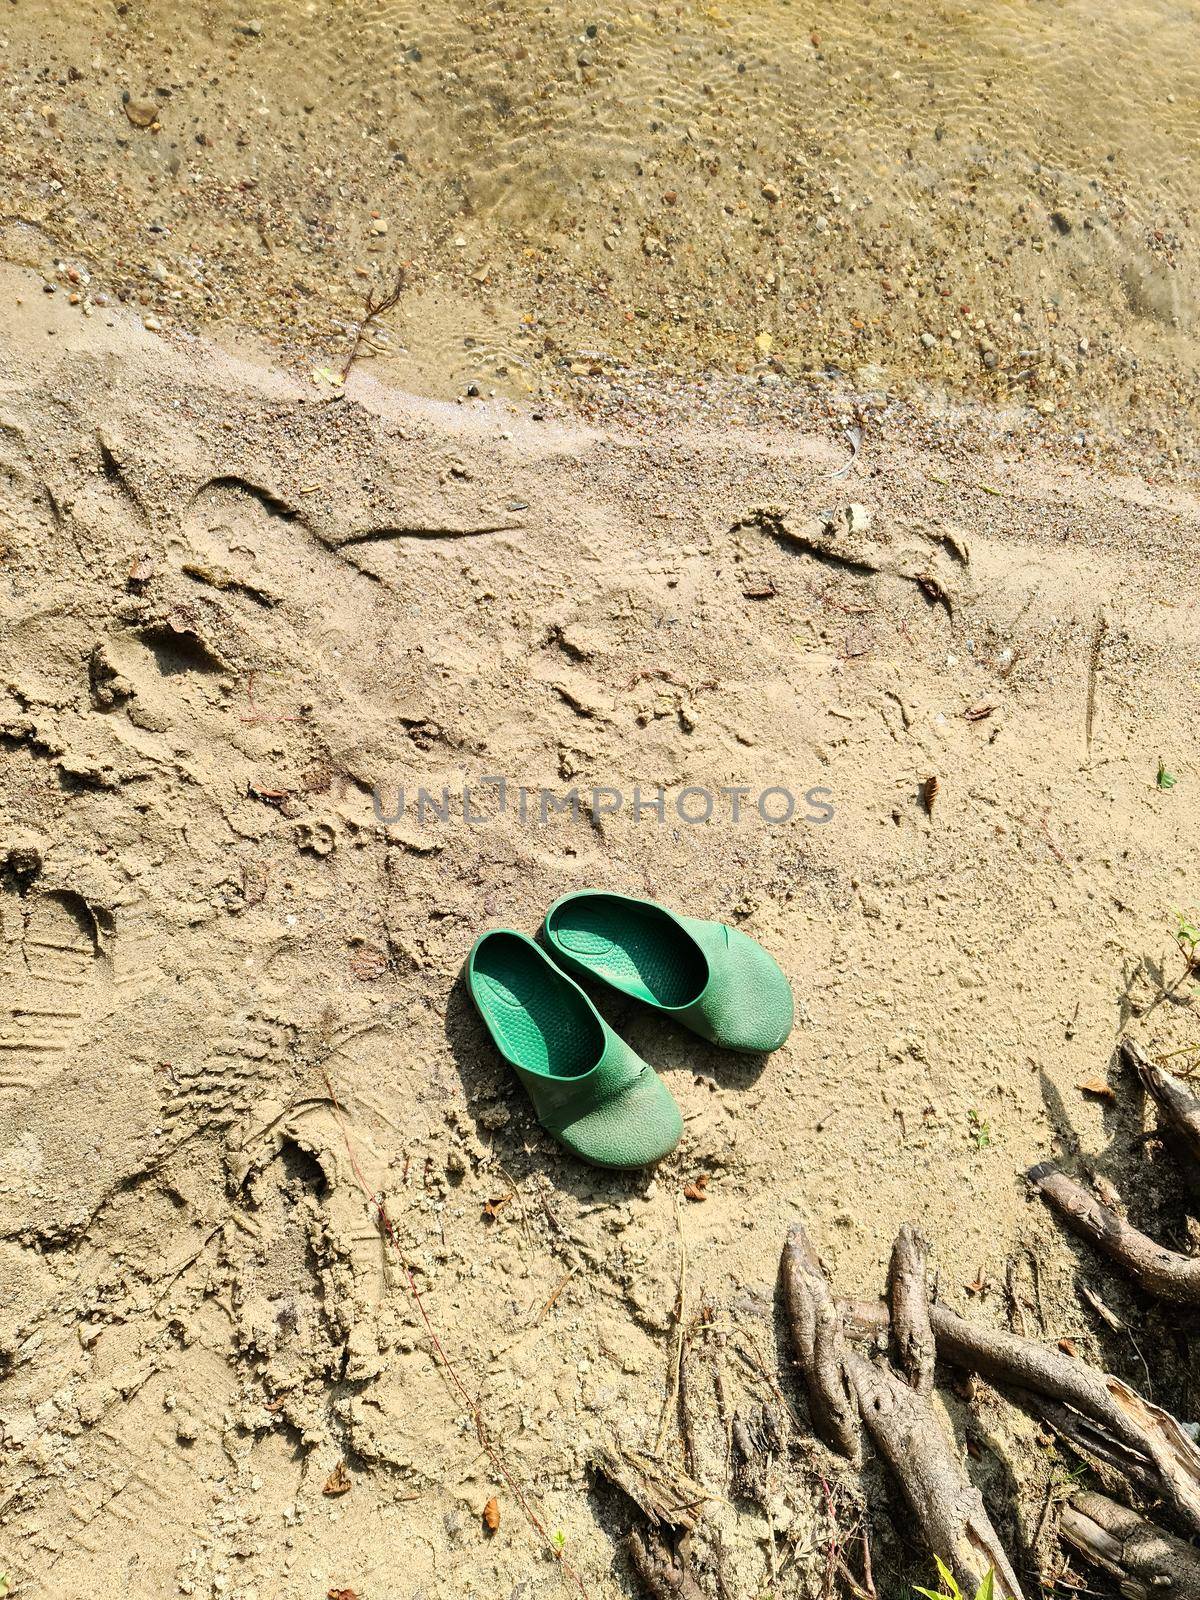 A pair of abandoned flip flops in the sand at a lake